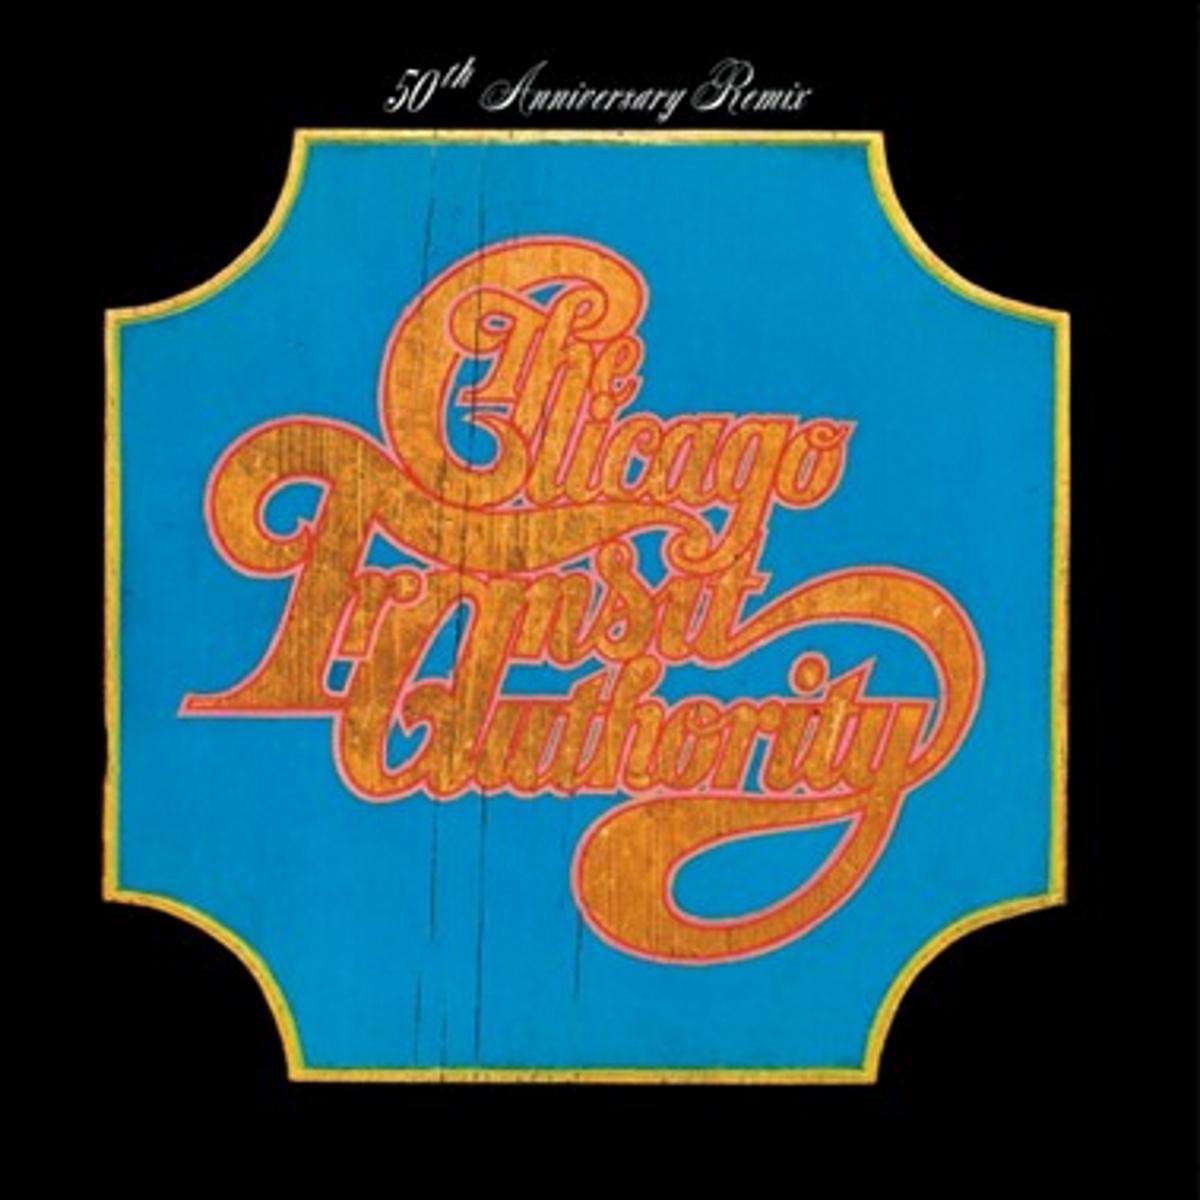 Chicago Transit Authority Live in Amsterdam ea